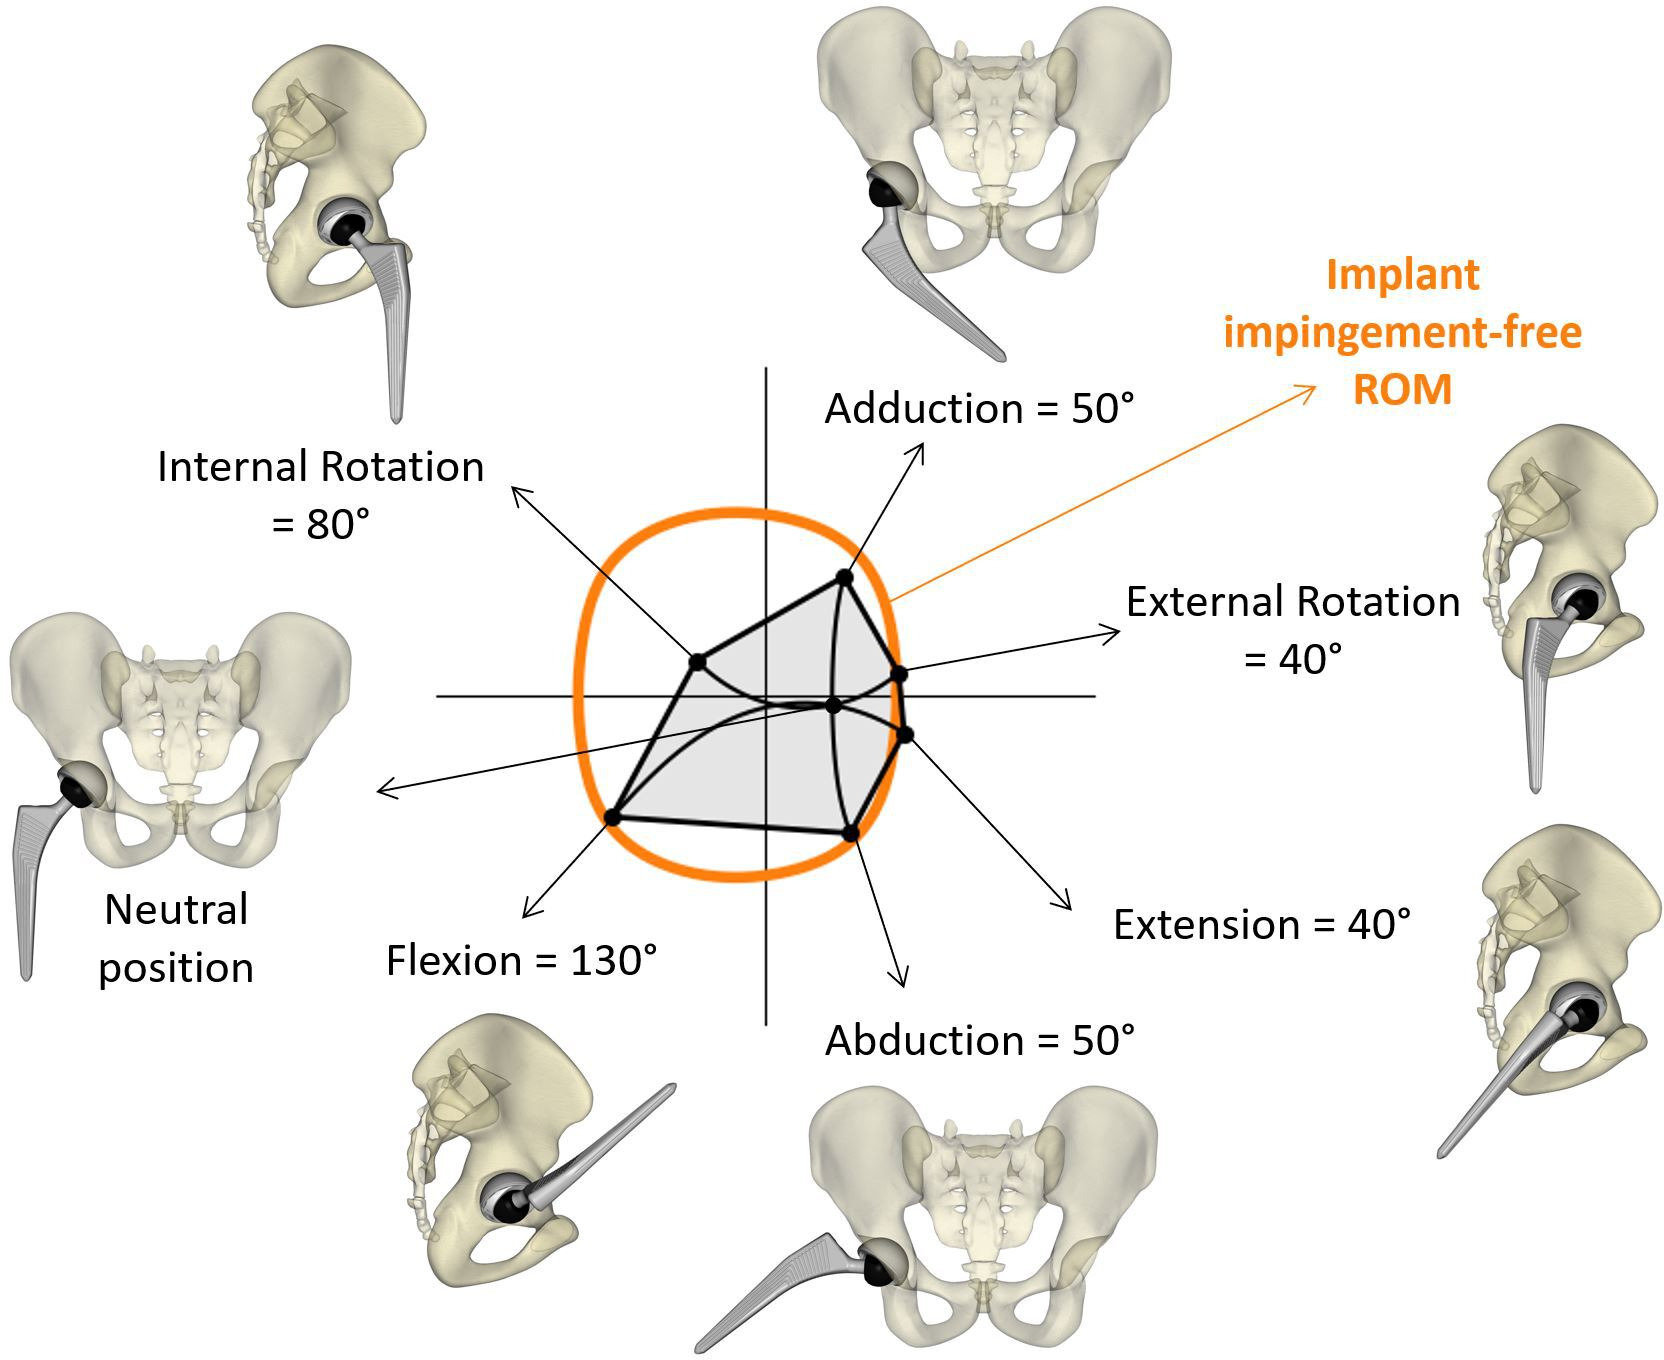 Fig. 2 
            Hip physiological motions as defined by Widmer and Zurfluh,12 overlaid with the implant impingement-free range of motion (ROM) to determine impingement occurrence.
          